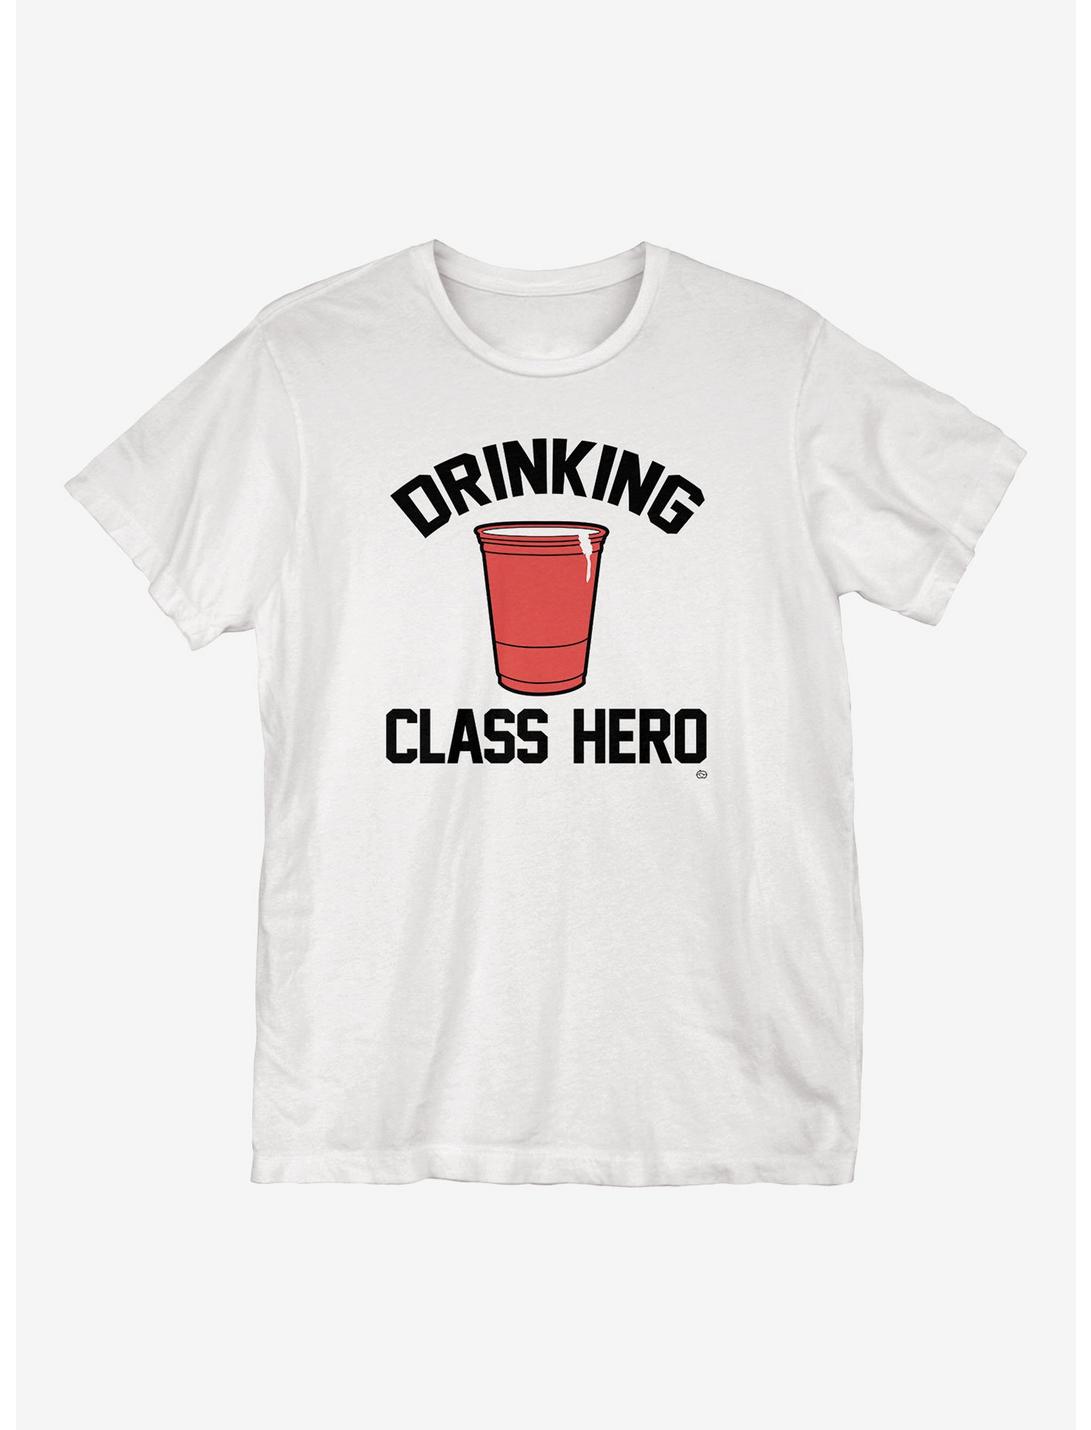 Drinking Class Hero Cup T-Shirt, WHITE, hi-res